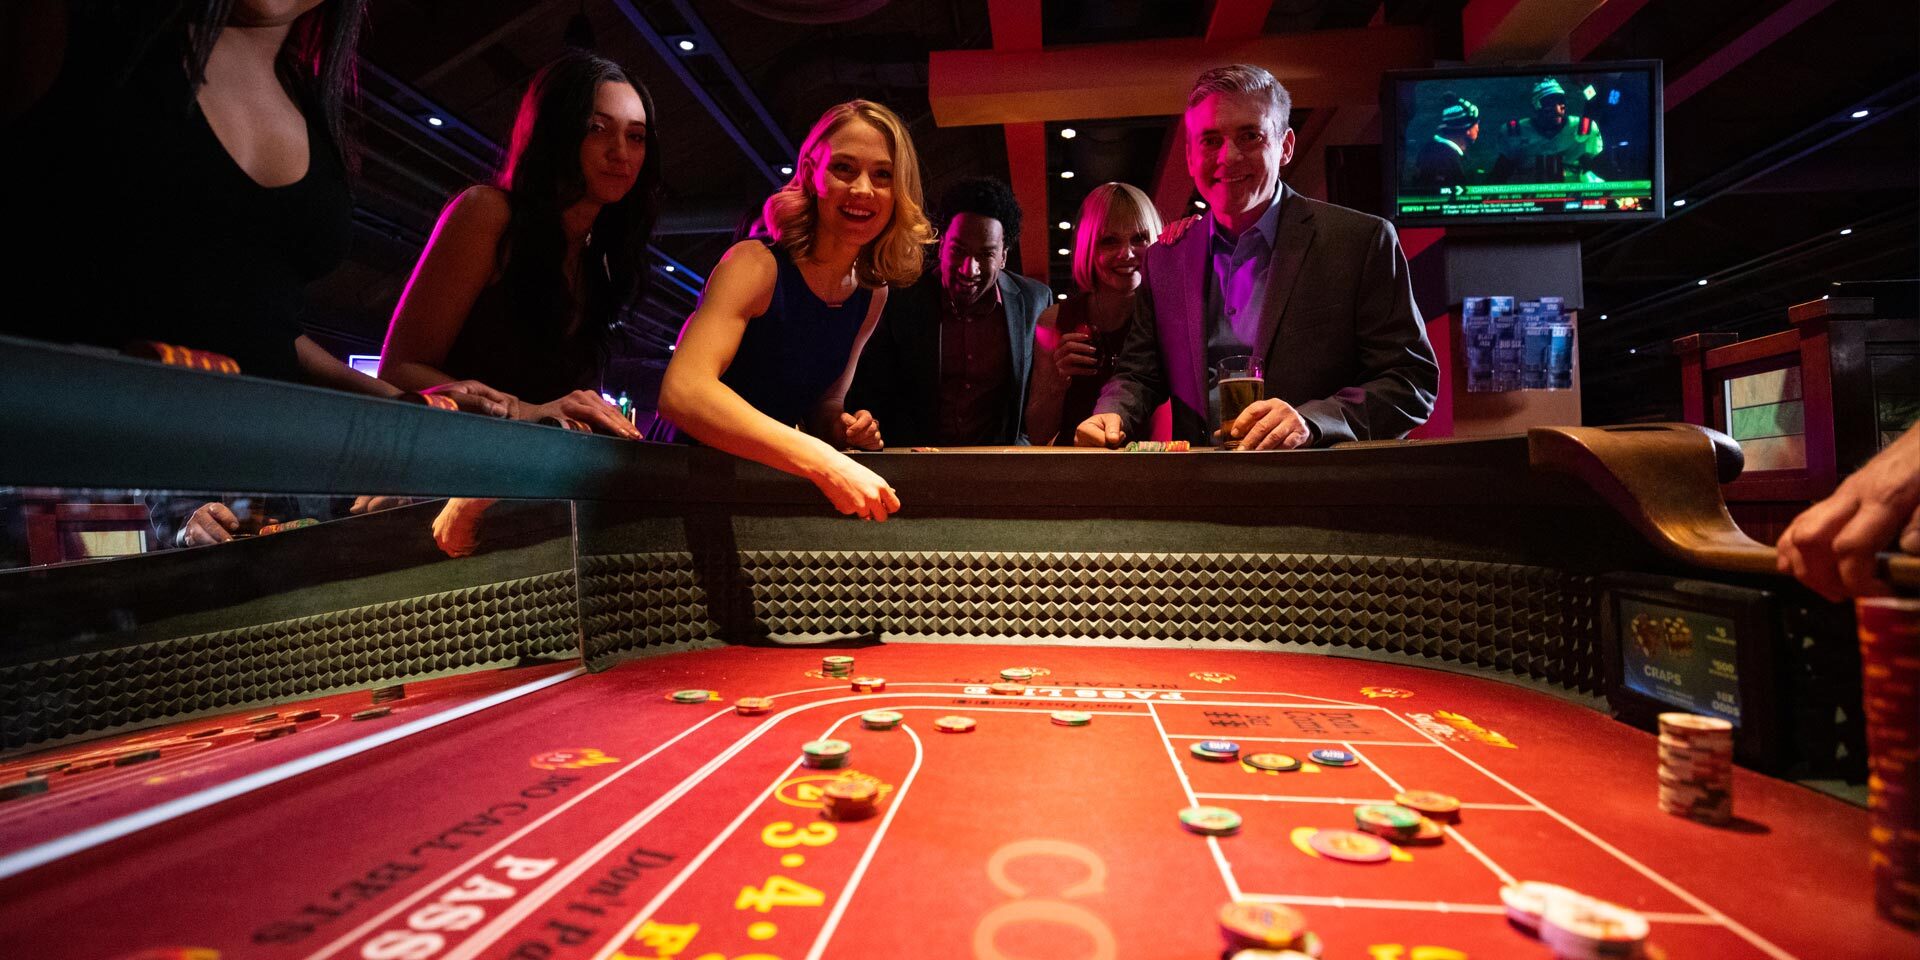 Betting Positions On a Baccarat Table